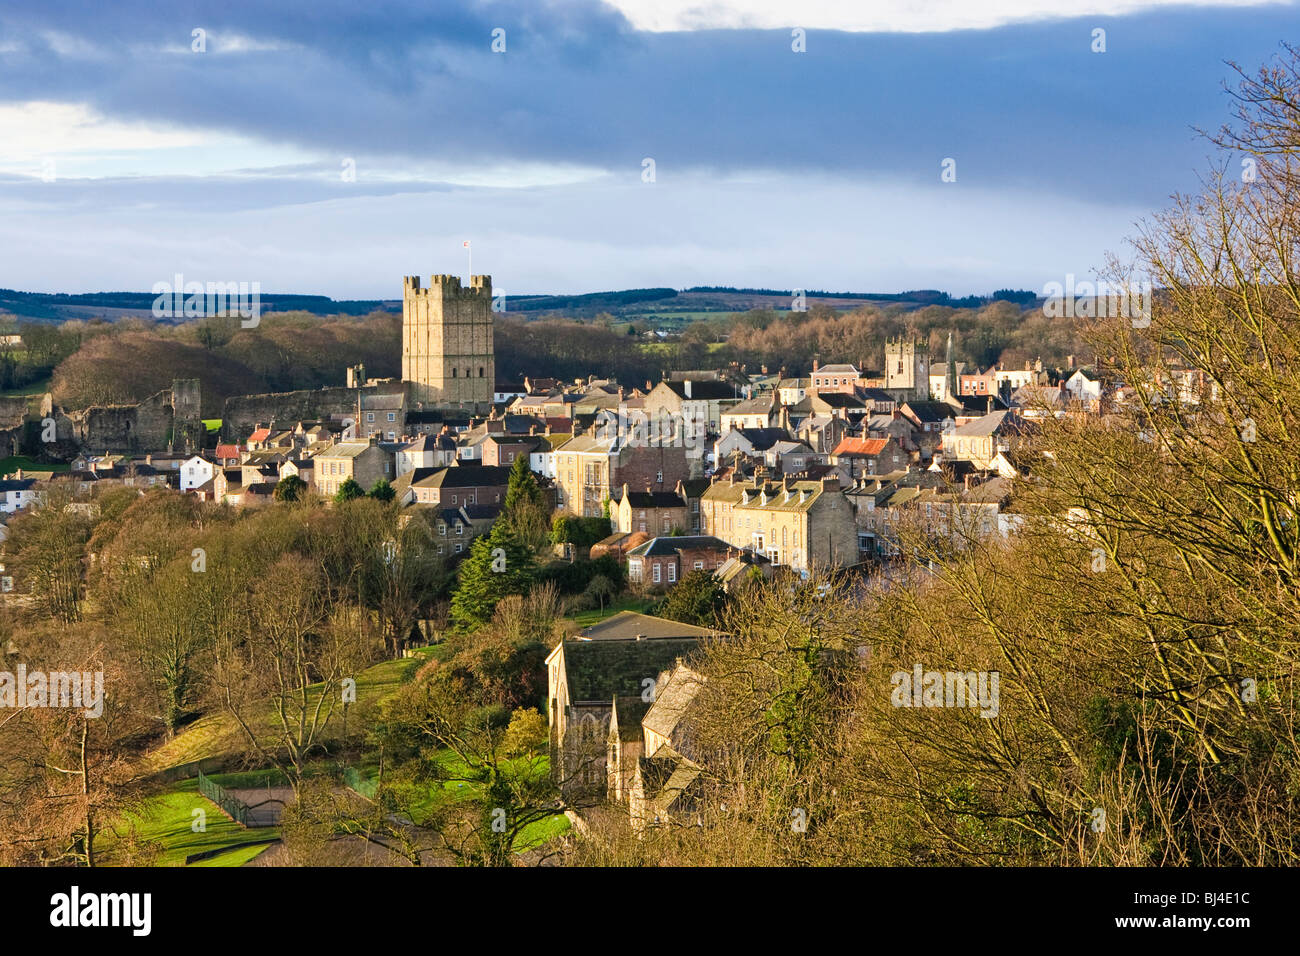 Richmond Castle and town on the edge of the Yorkshire Dales, North Yorkshire England UK Stock Photo